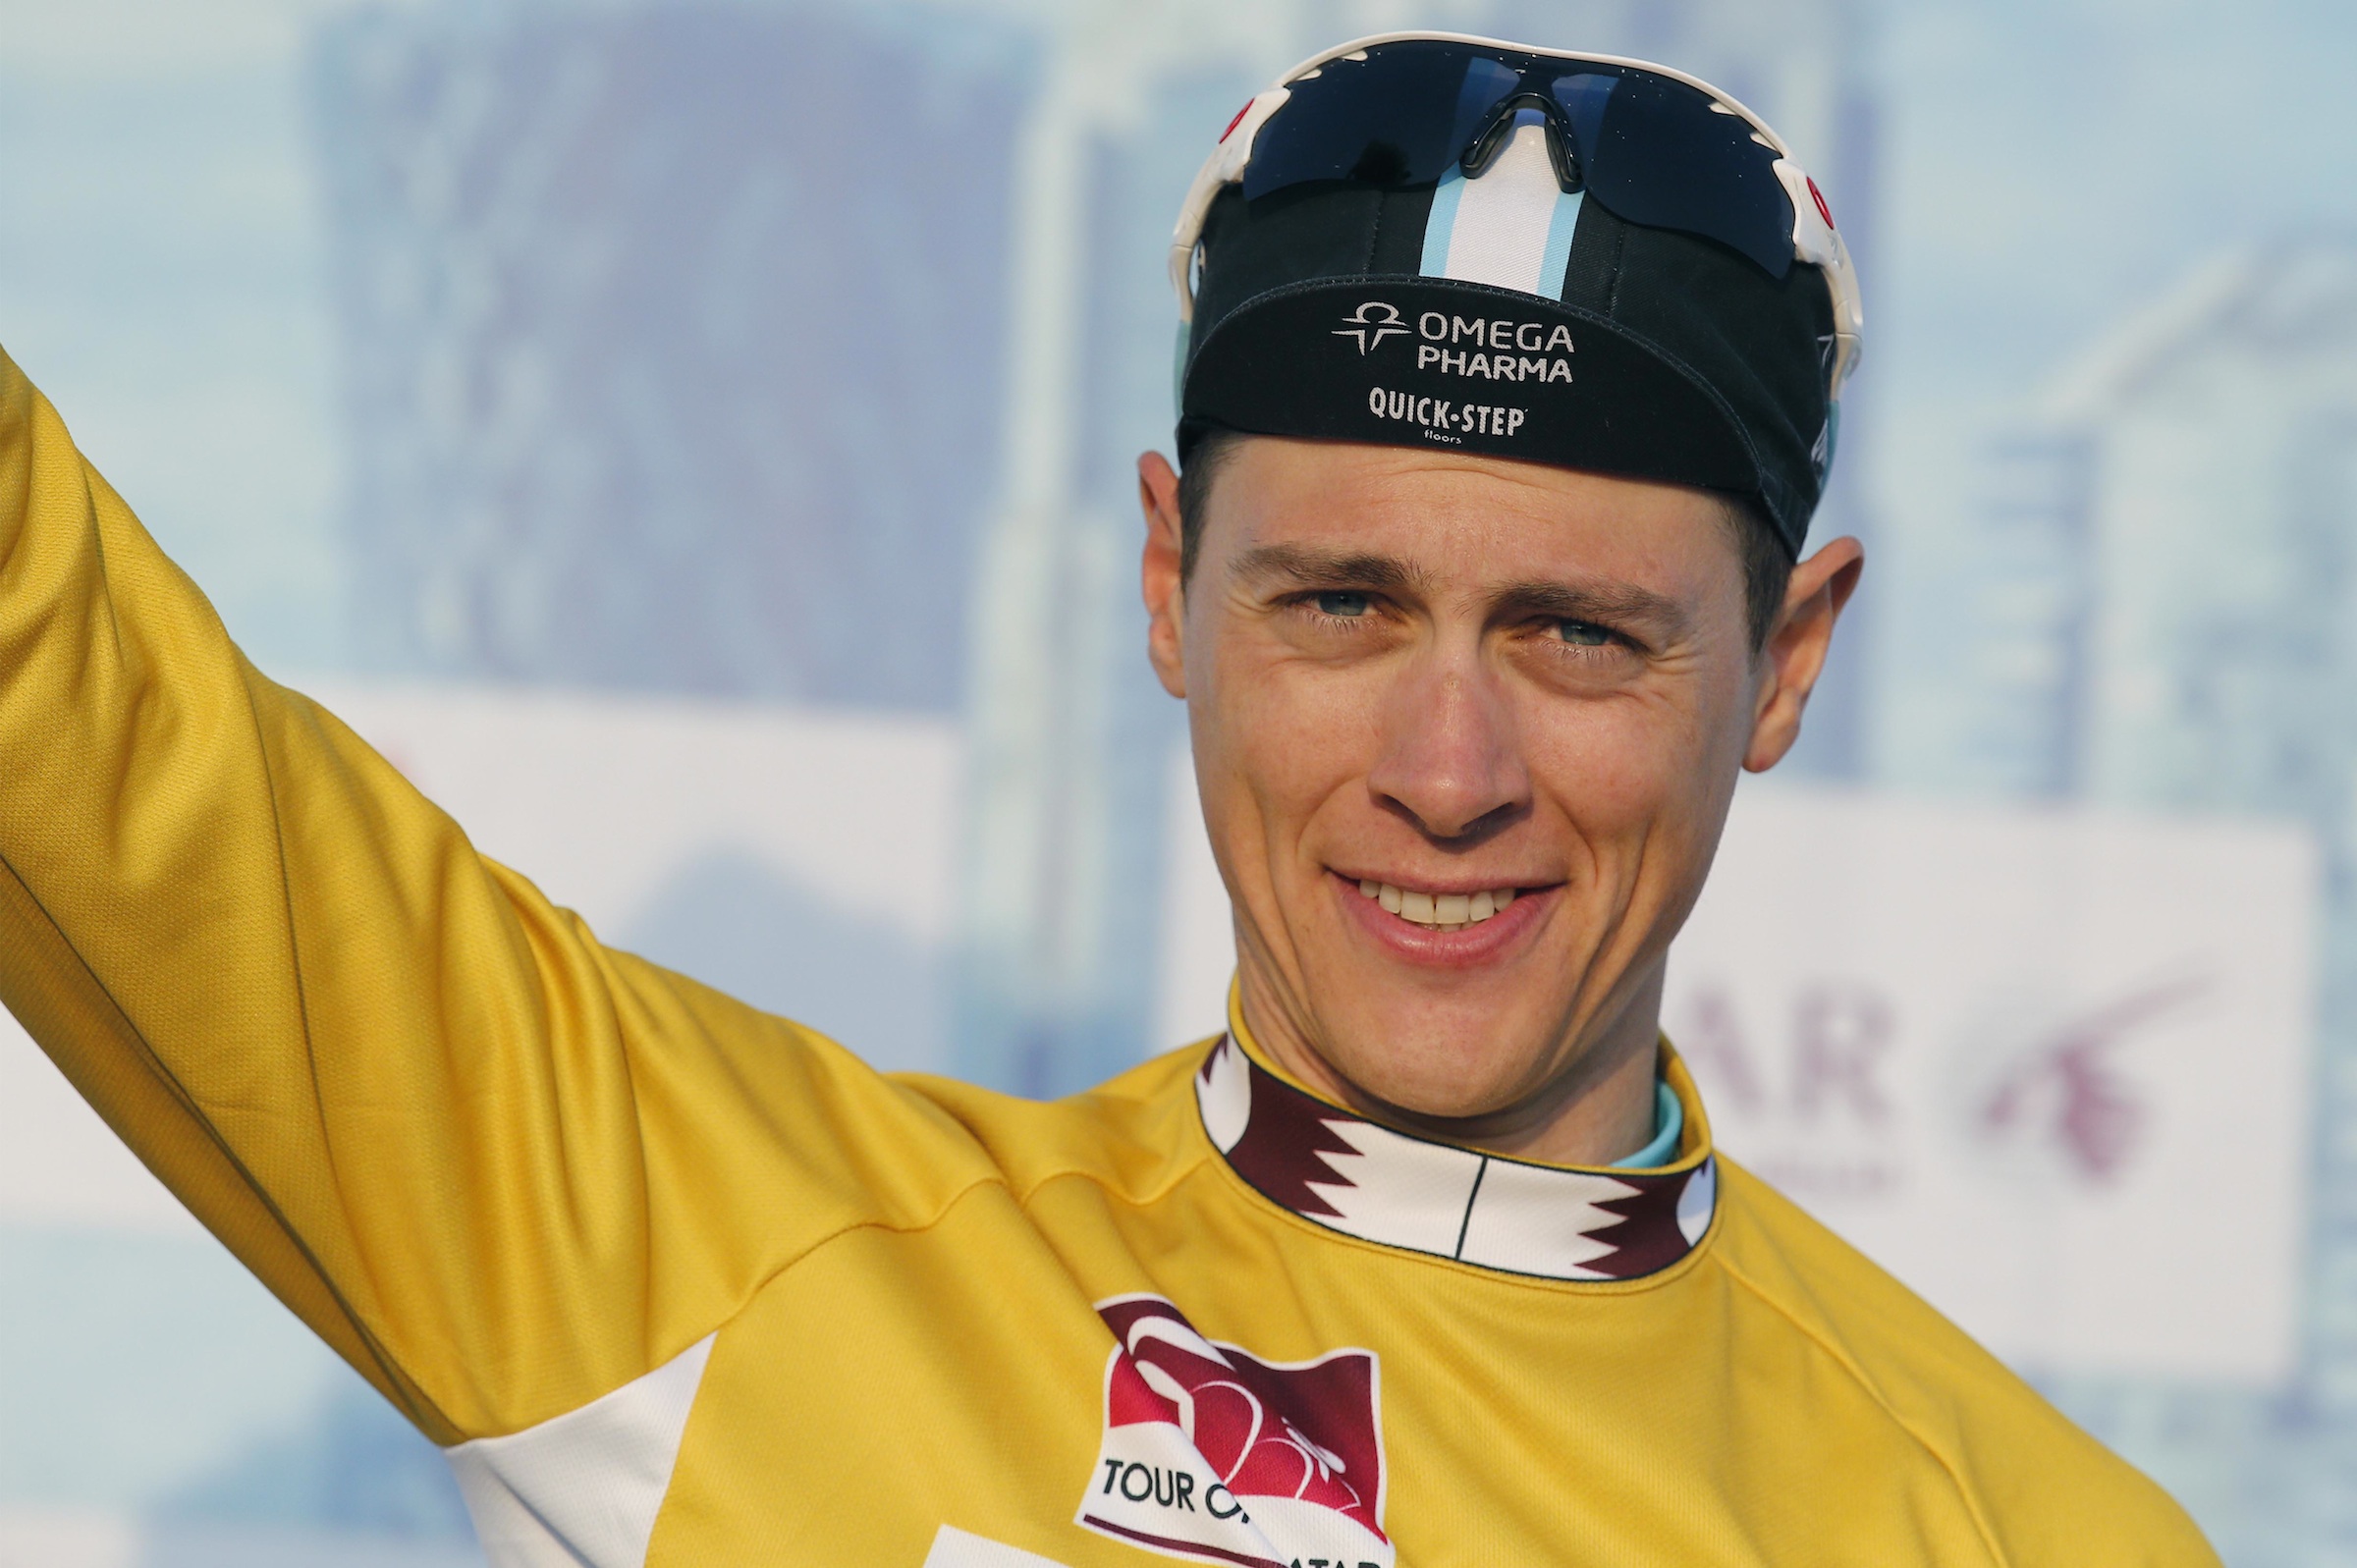 Niki Terpstra, Tour of Dubai 2014, stage one, podium, pic: Tim De Waele/OPQS, submitted by Alessandro Tegner